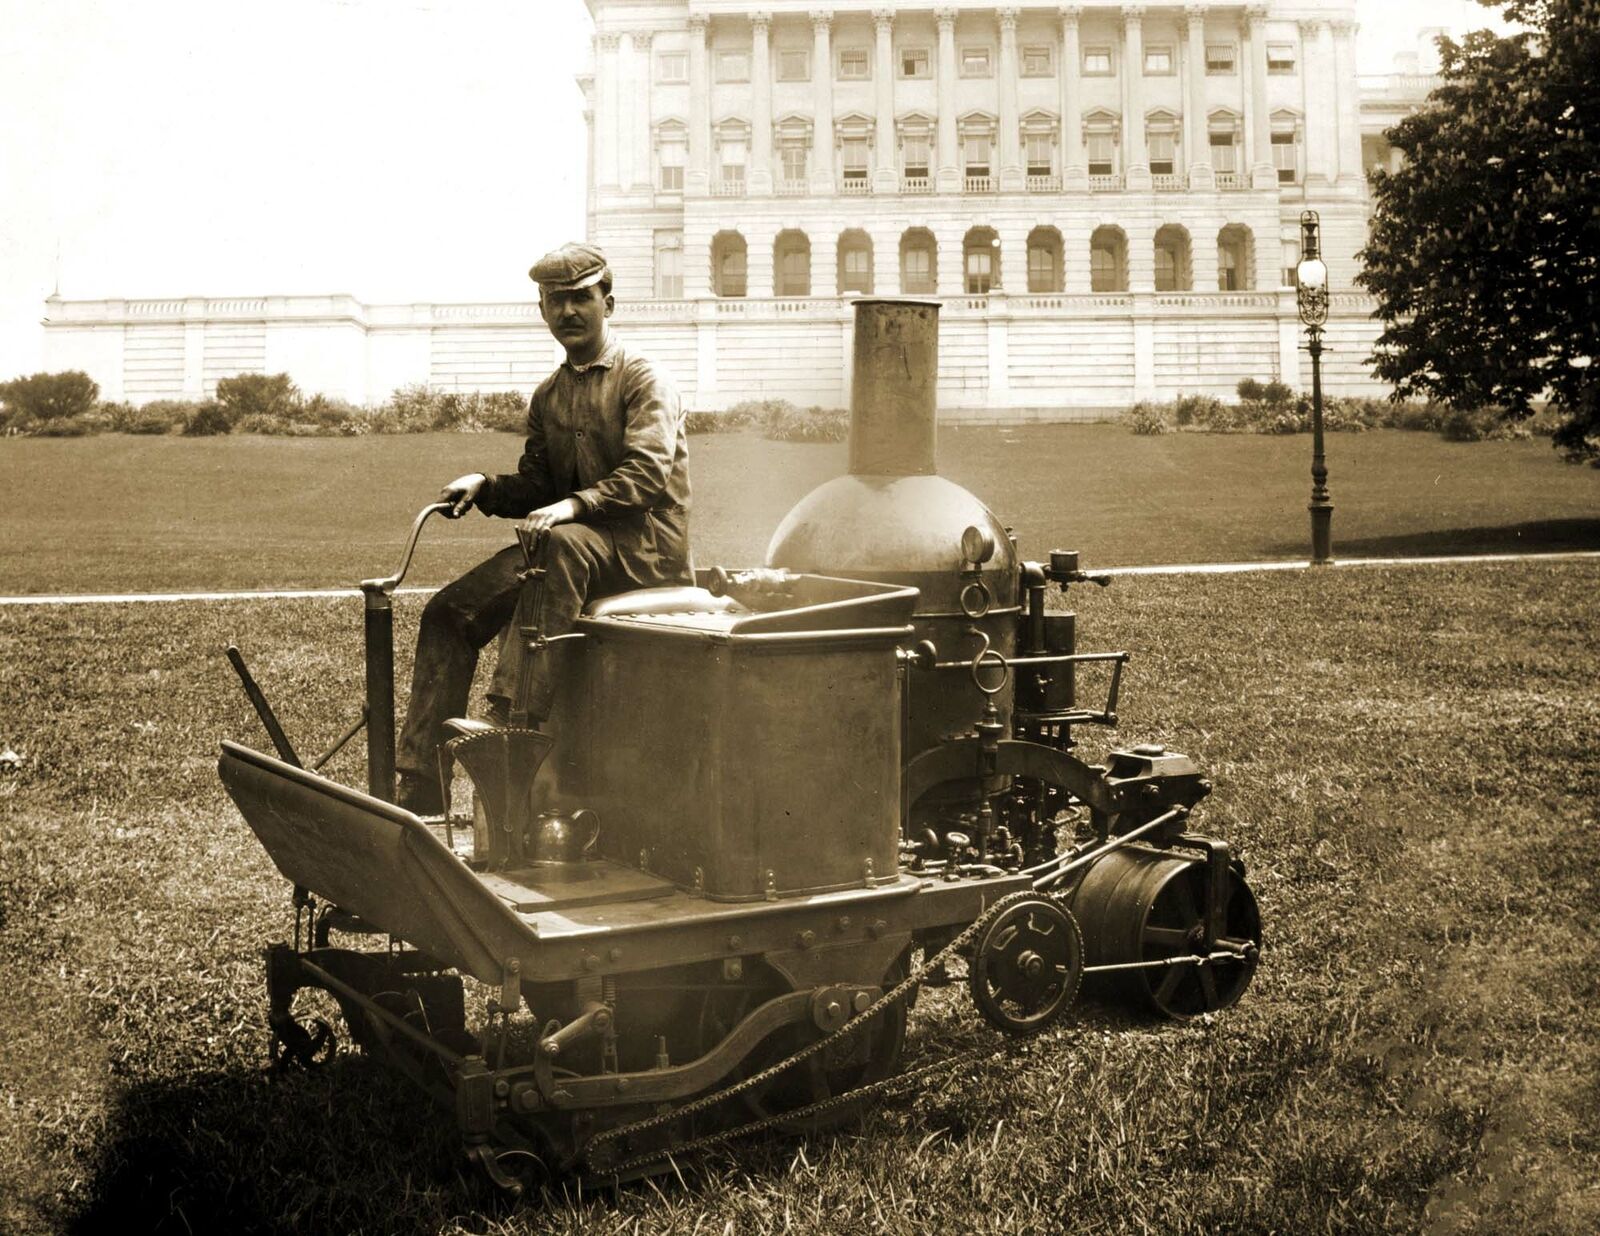 1903 Steam Powered Lawn Mower, U.S. Capitol, DC Old Photo 8.5